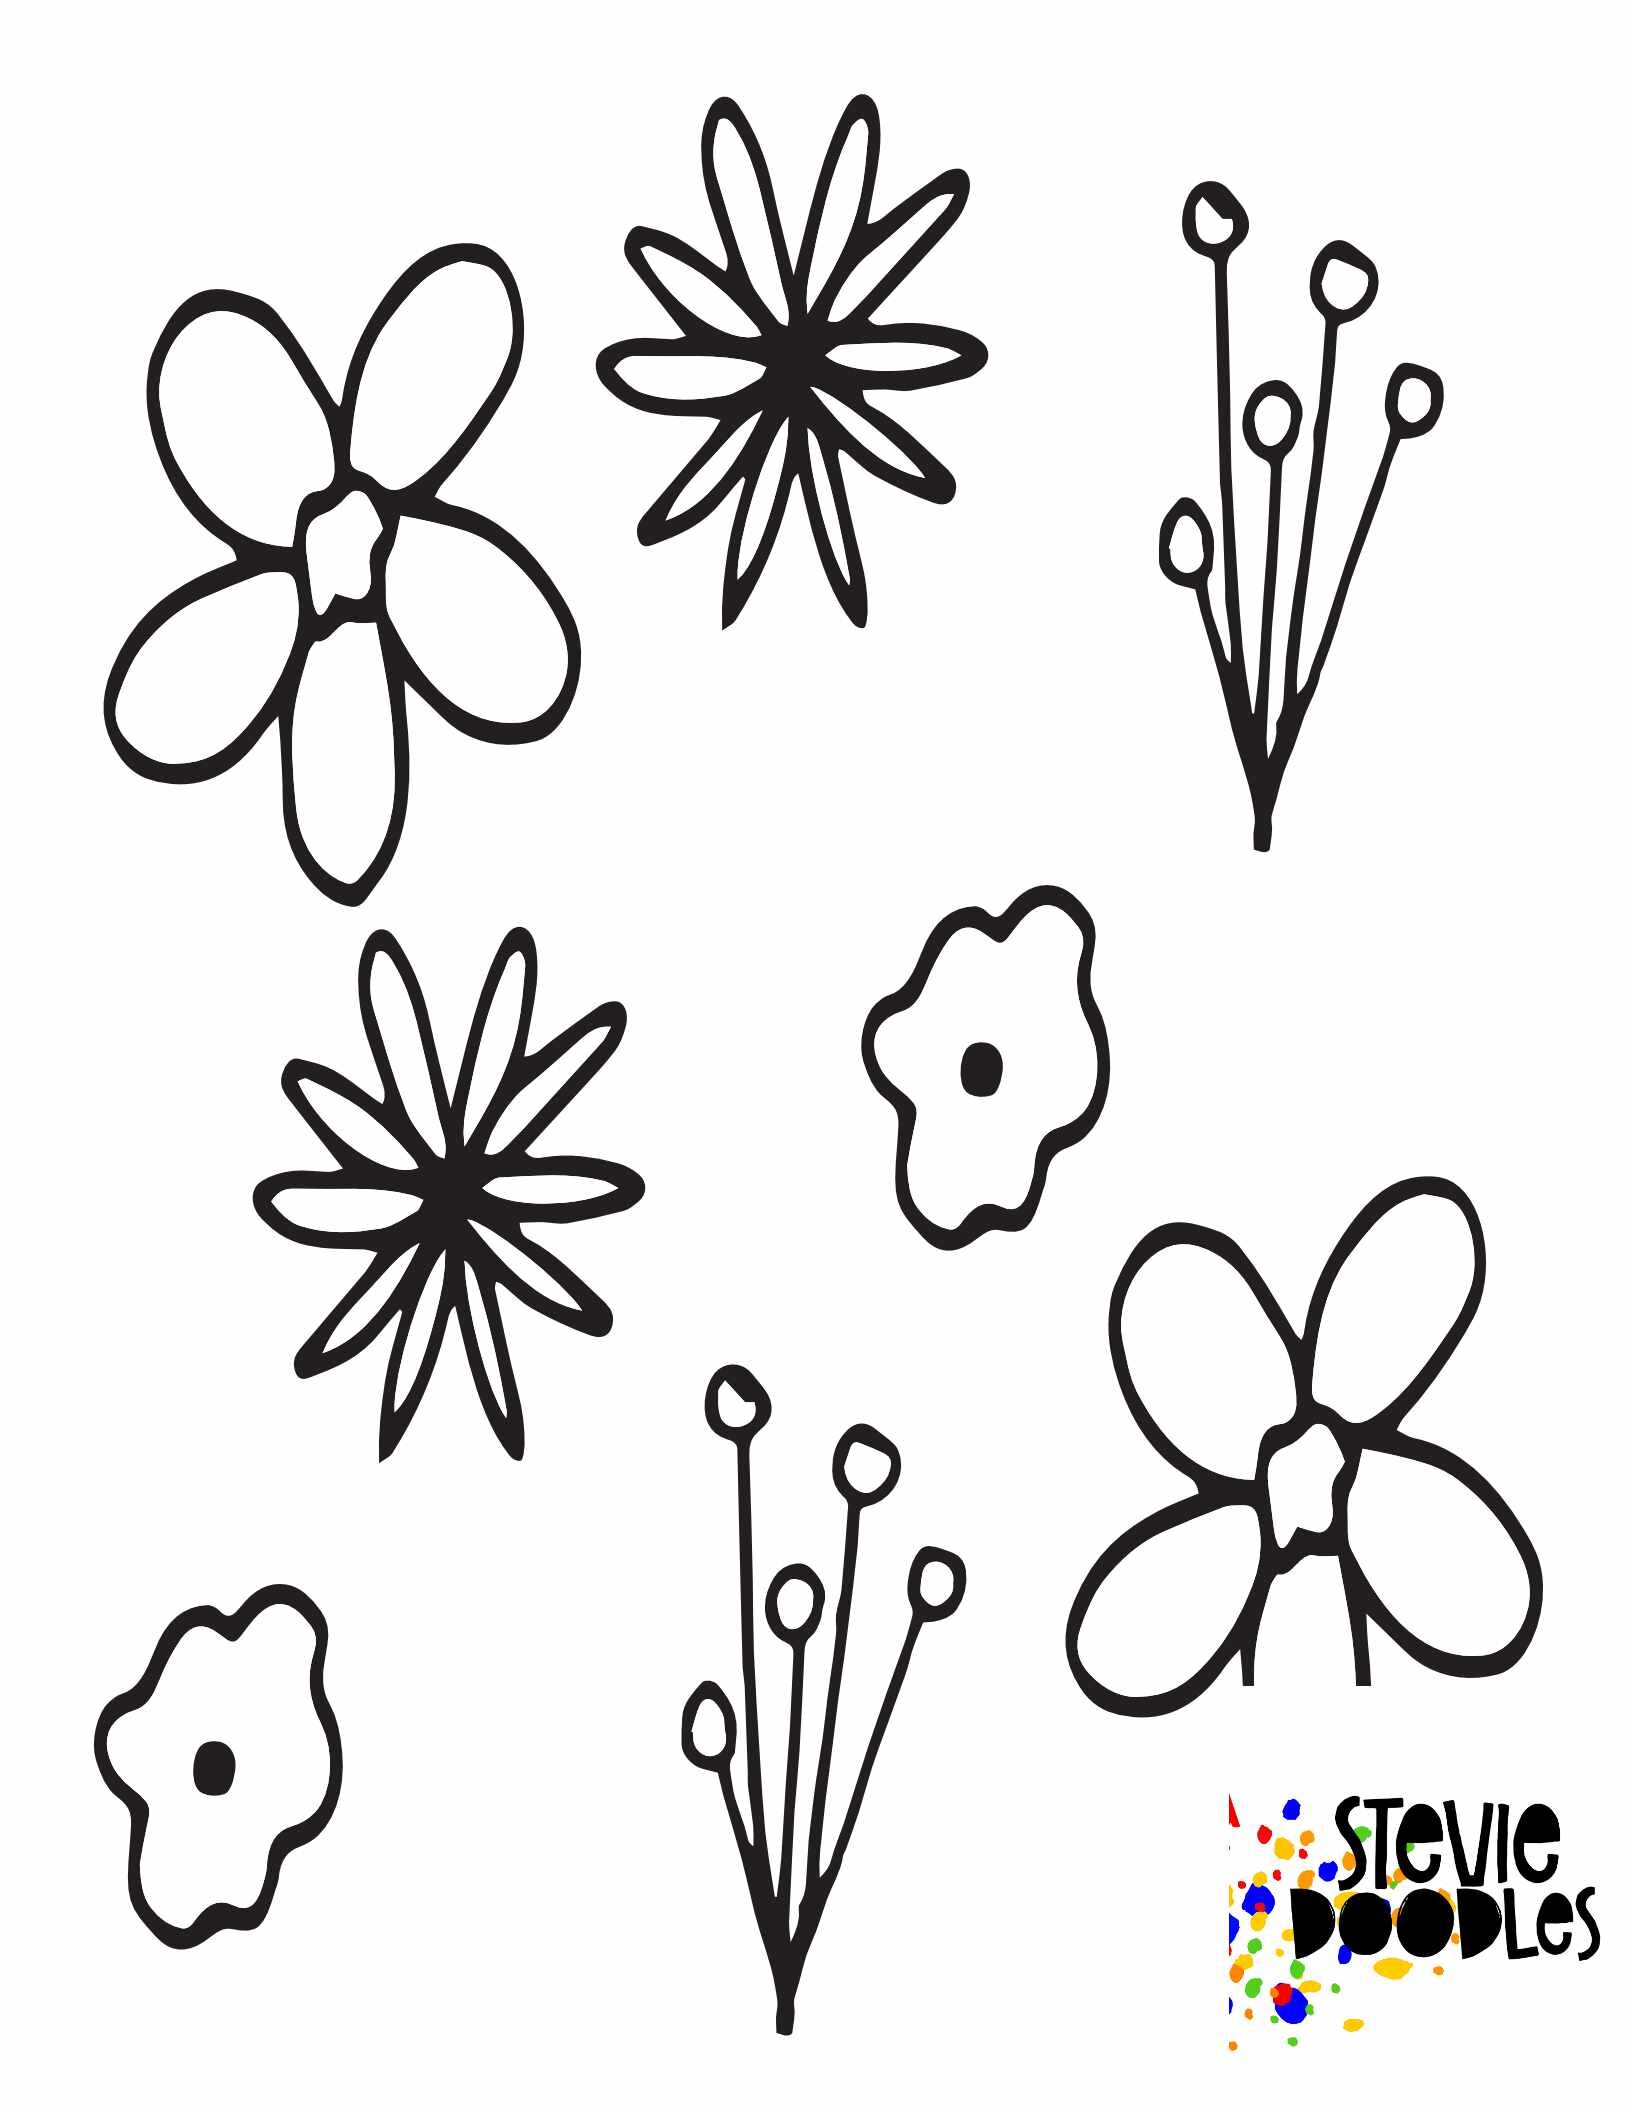 7 scattered little flowers to color on a kids coloring page